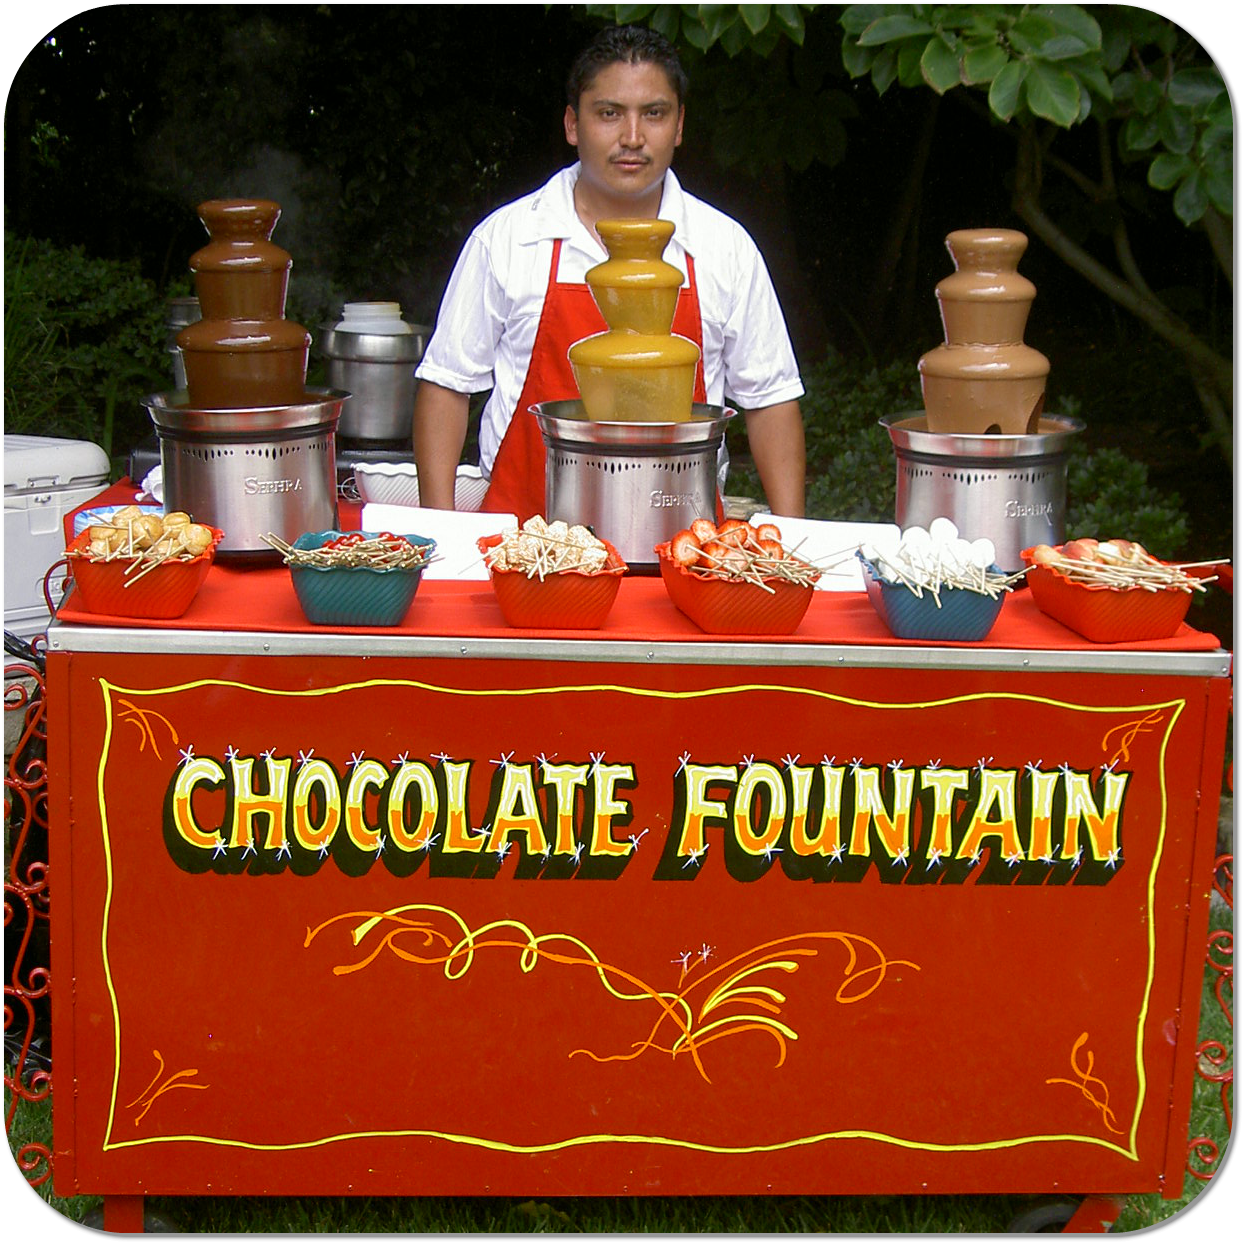 Chocolate Fountain Cart in Los Angeles, CA